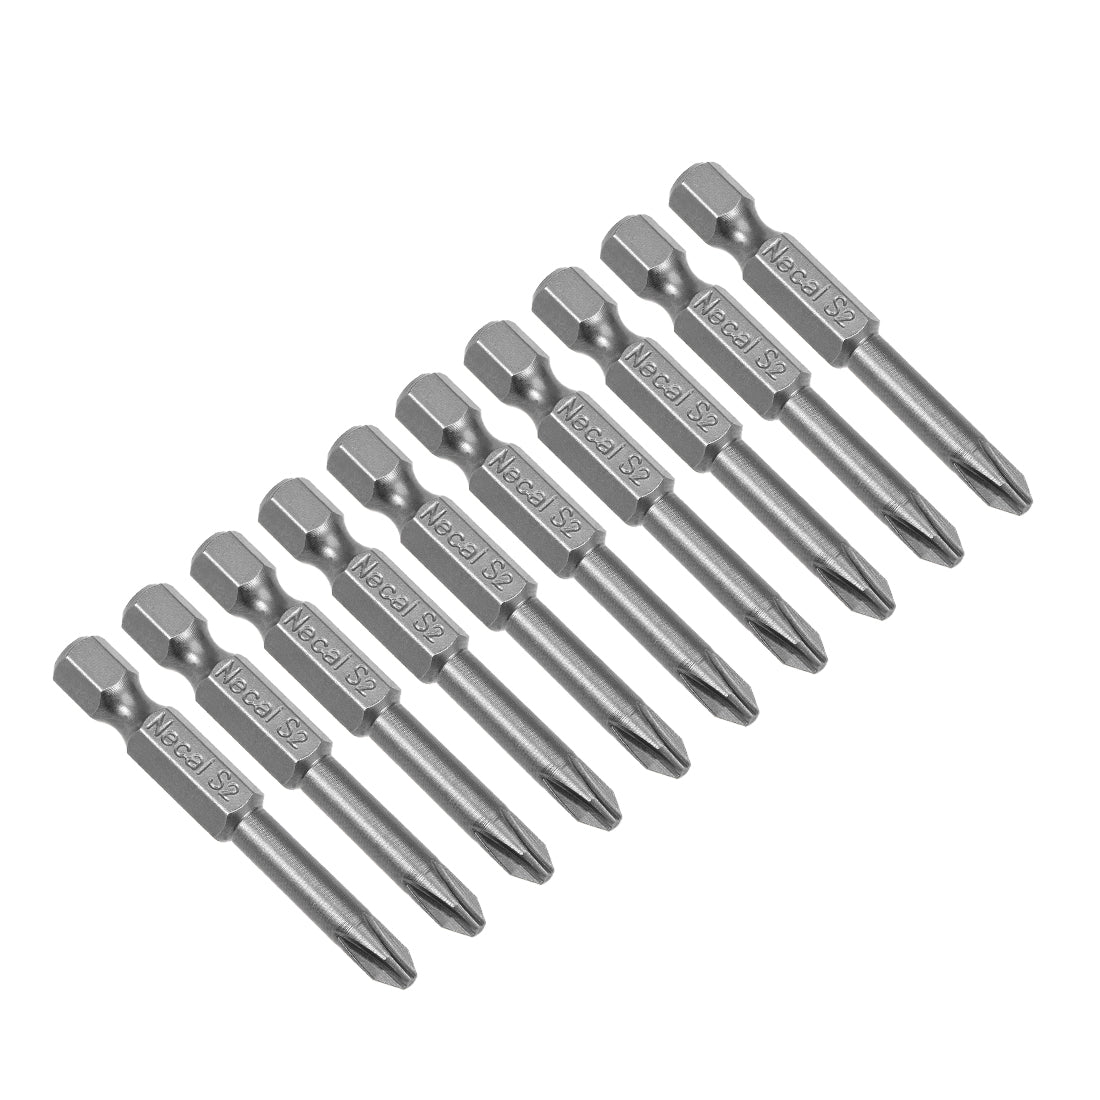 uxcell Uxcell 10 Pcs Magnetic Phillips Screwdriver Bits, Hex Shank S2 Power Tool